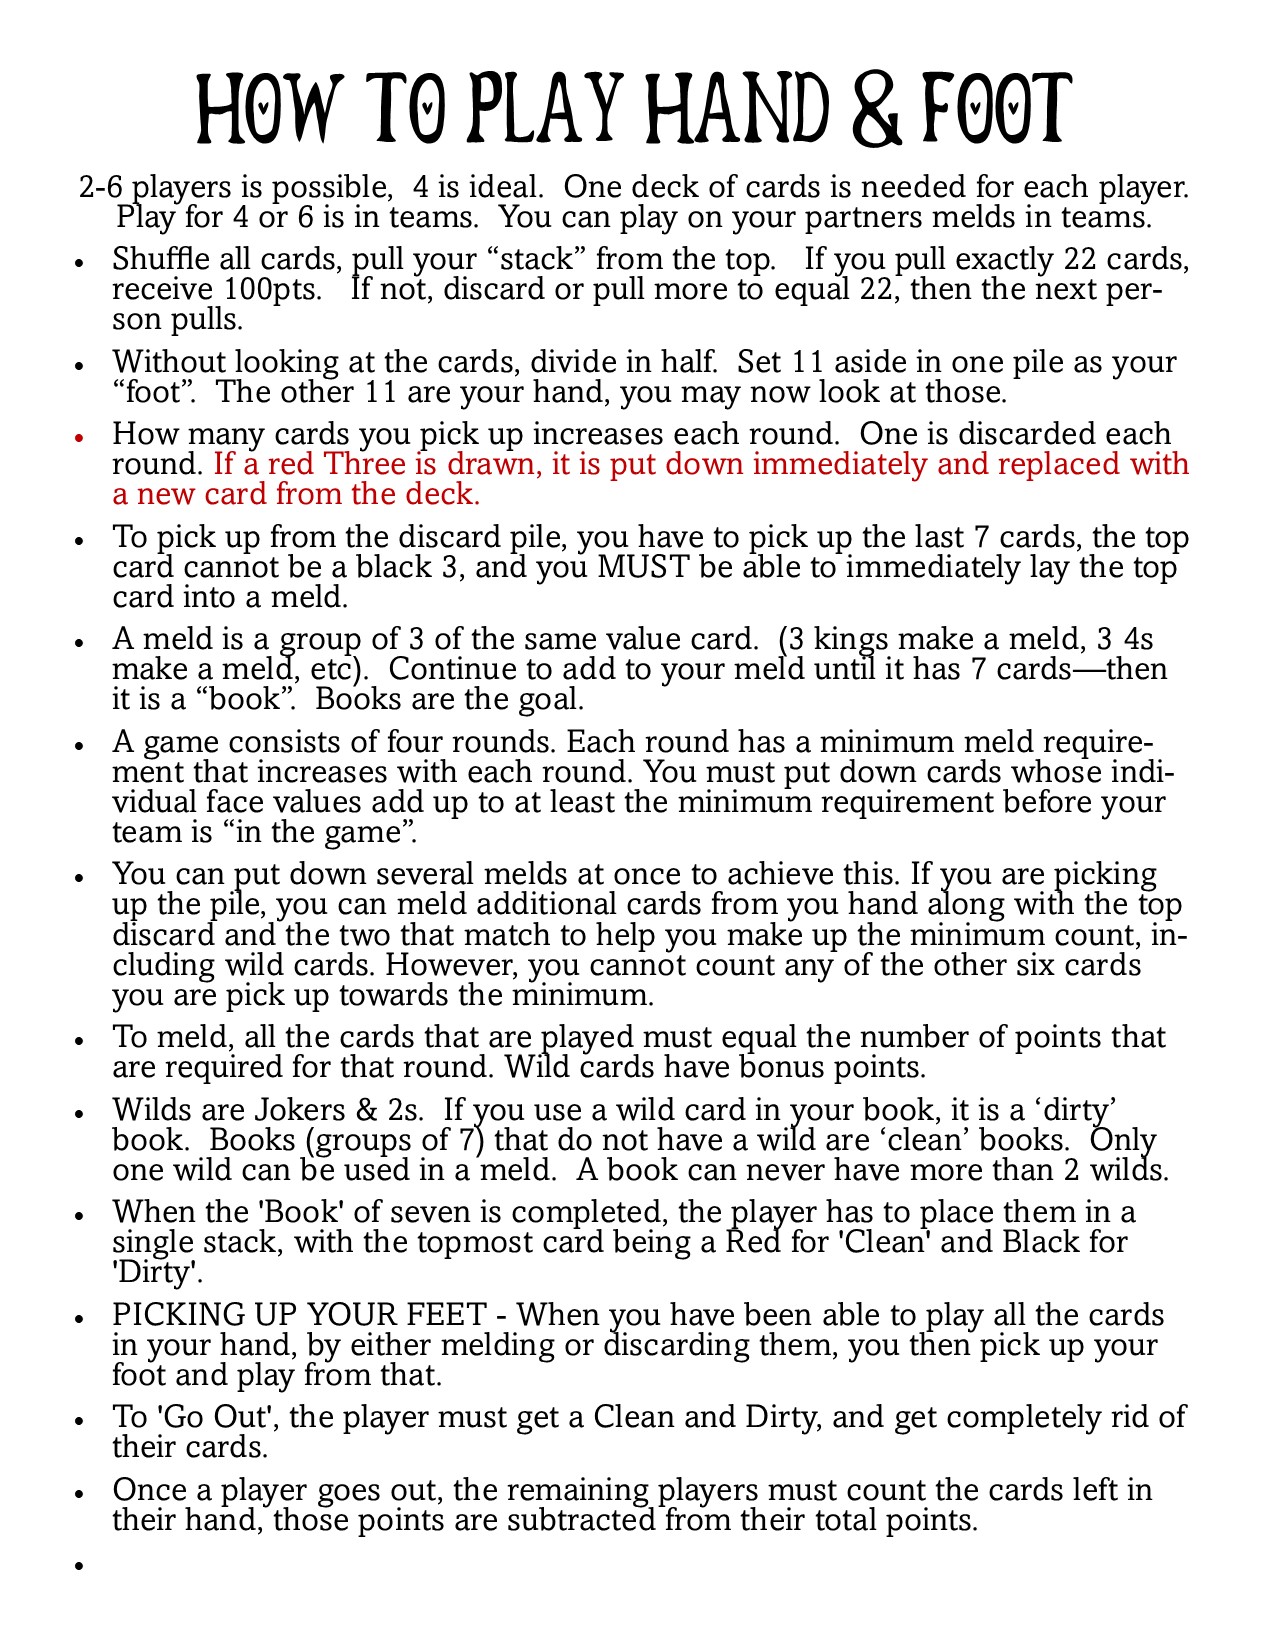 hand-and-foot-game-printable-rules-best-games-walkthrough